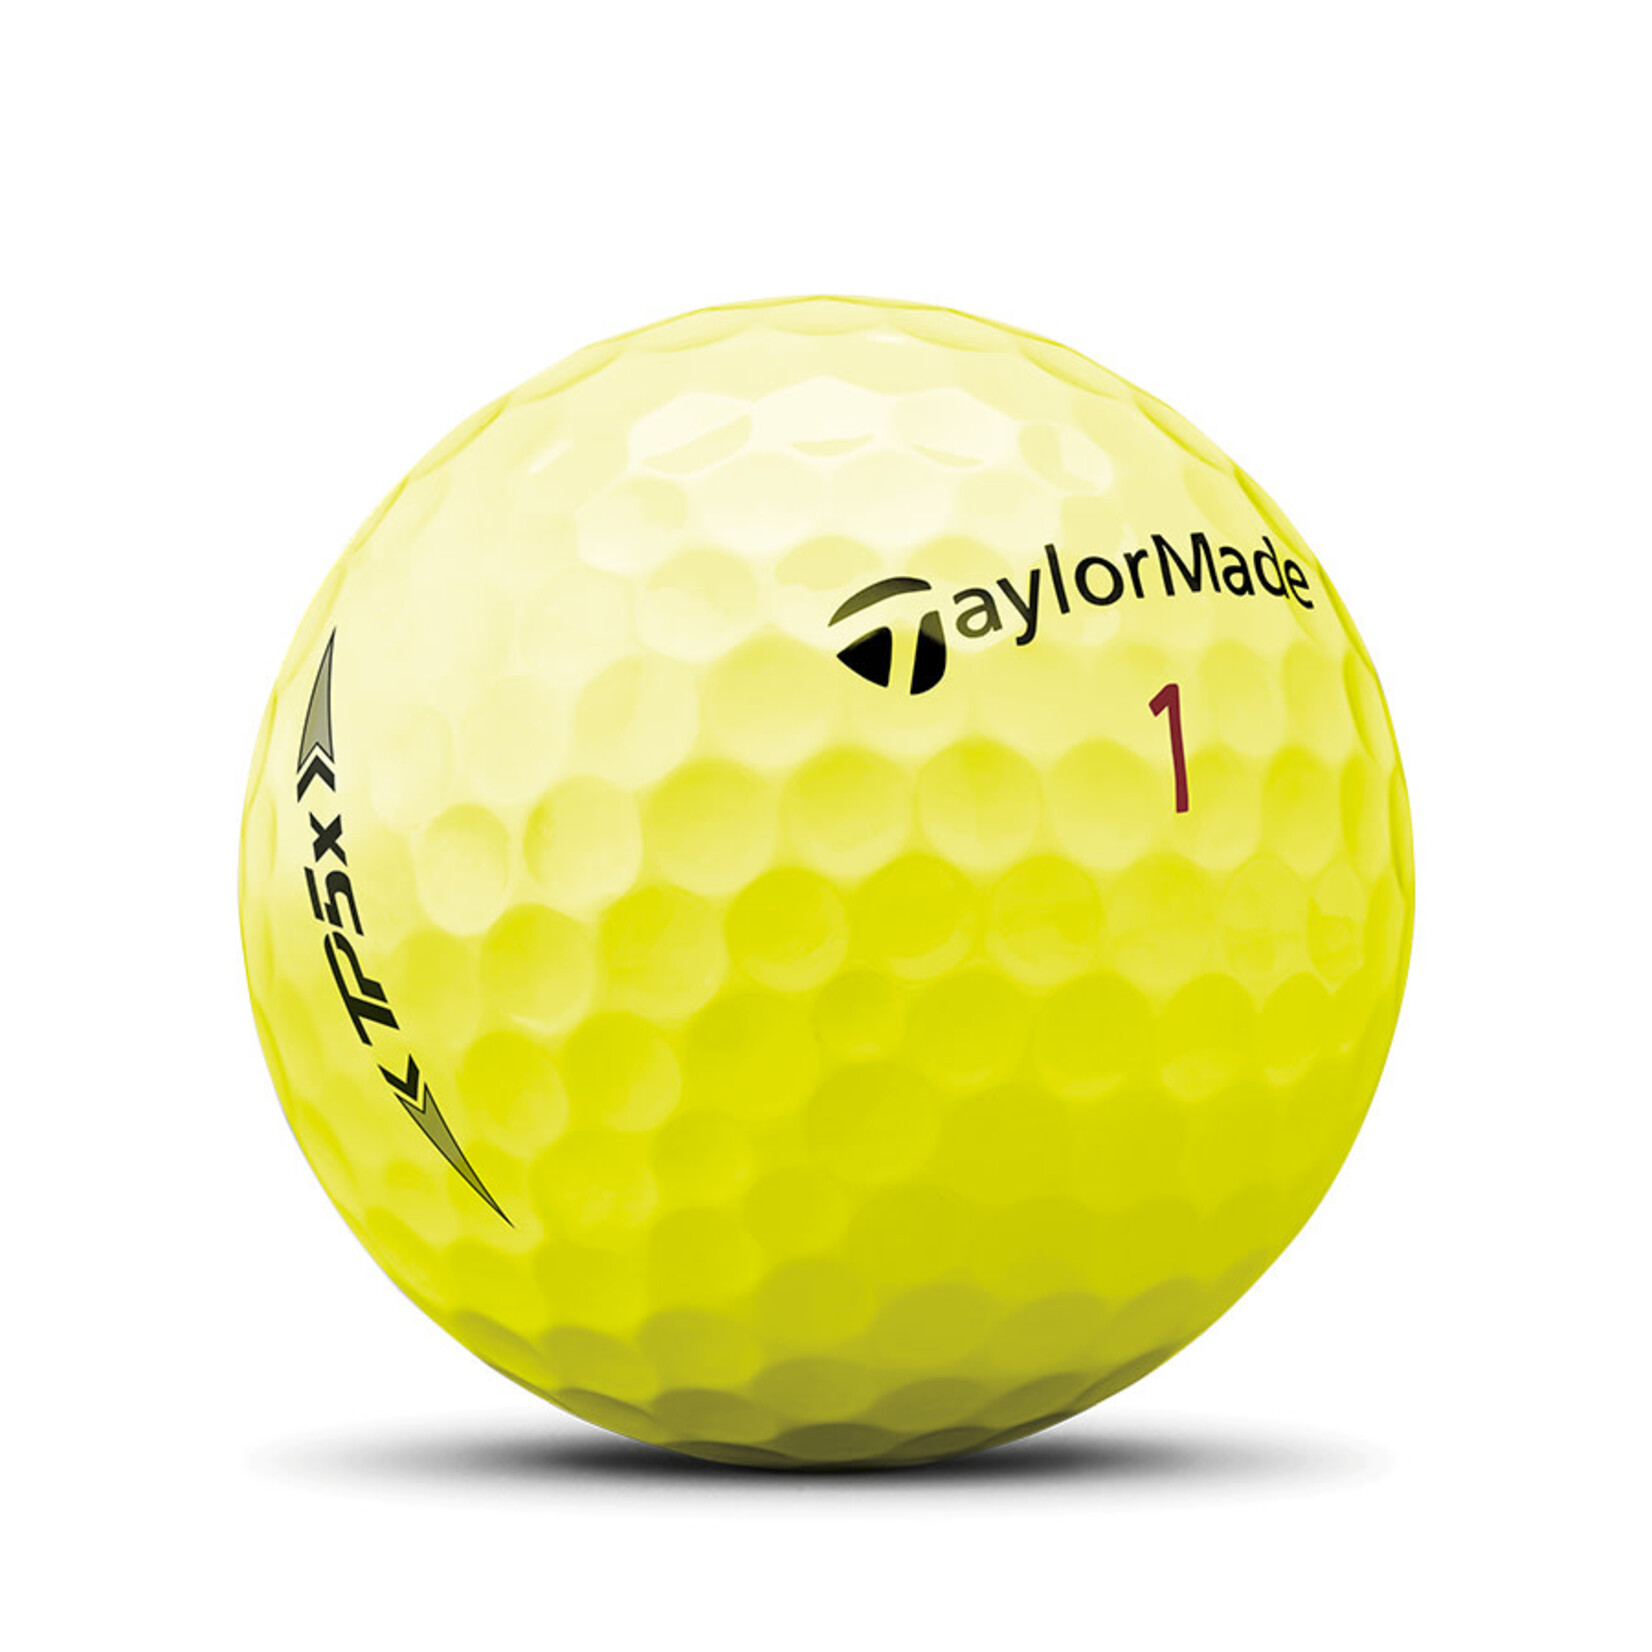 Taylor Made TaylorMade TP5x - Yellow